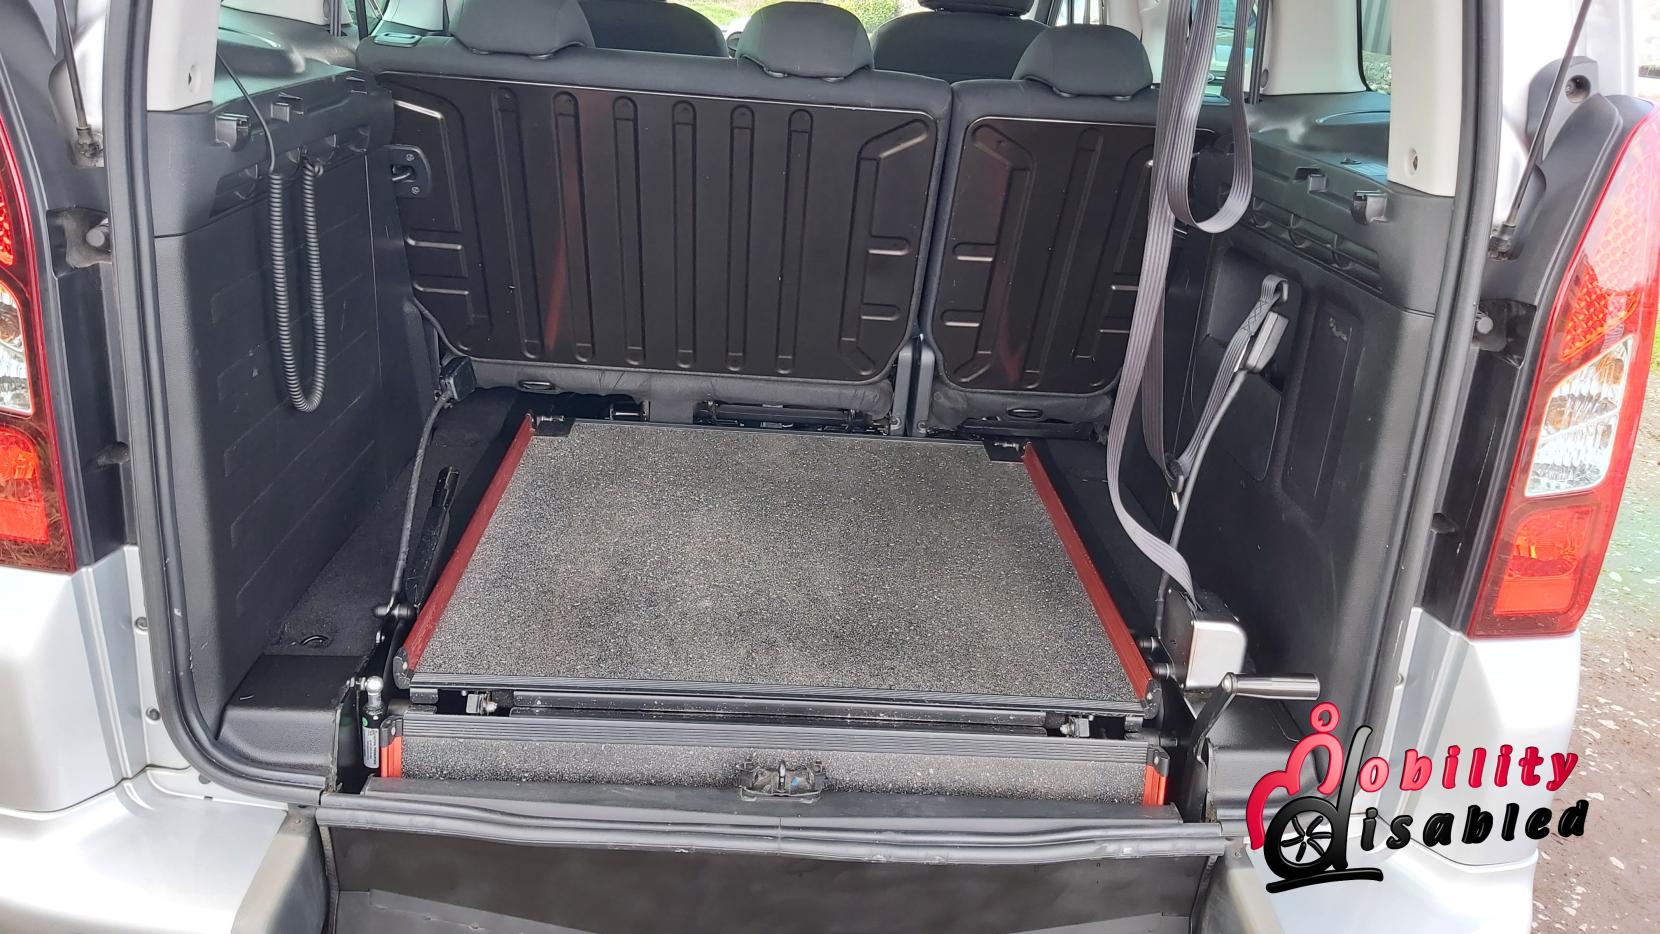 Peugeot Partner Wheelchair Accessible Vehicle